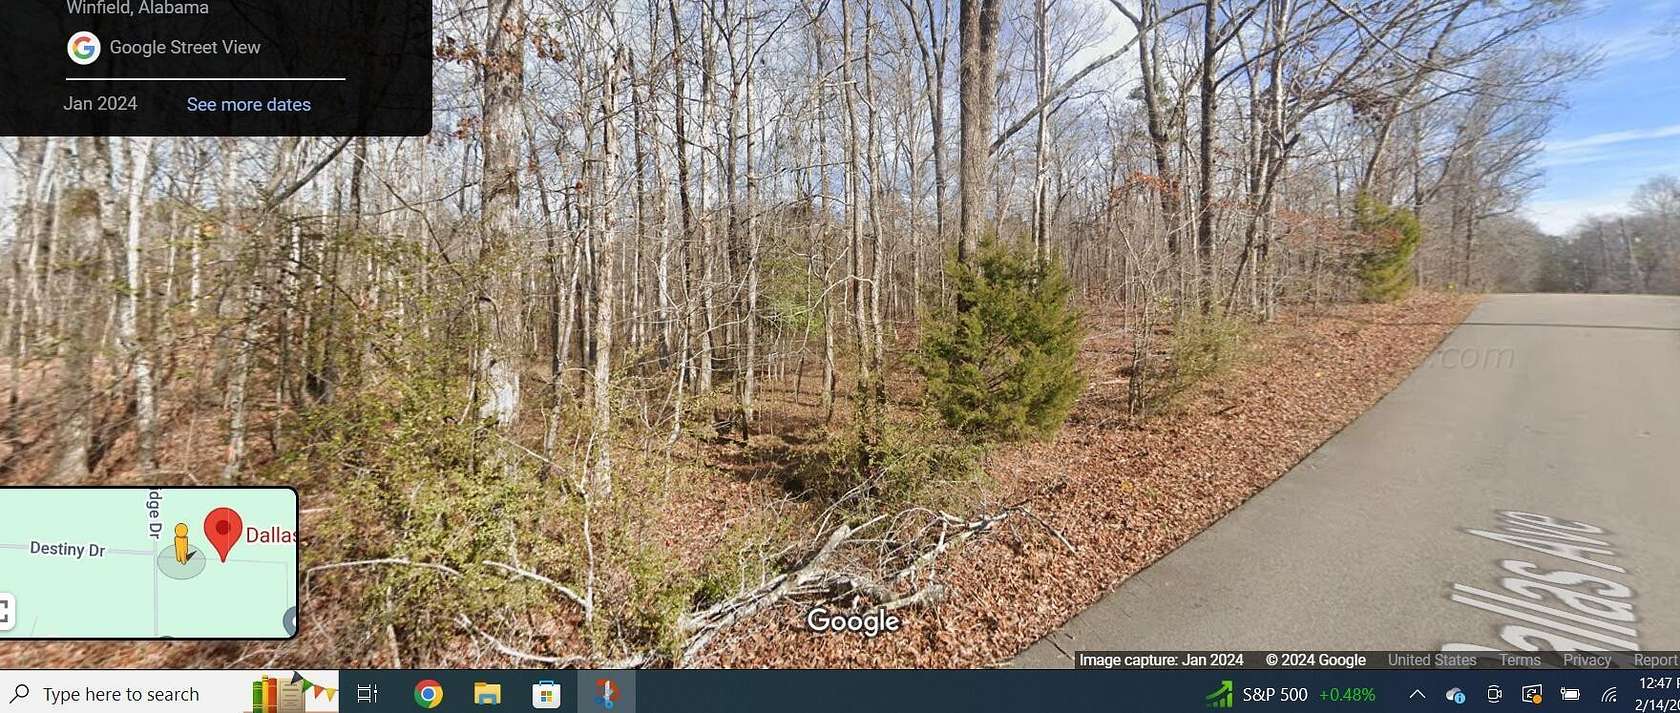 5.1 Acres of Land for Sale in Winfield, Alabama